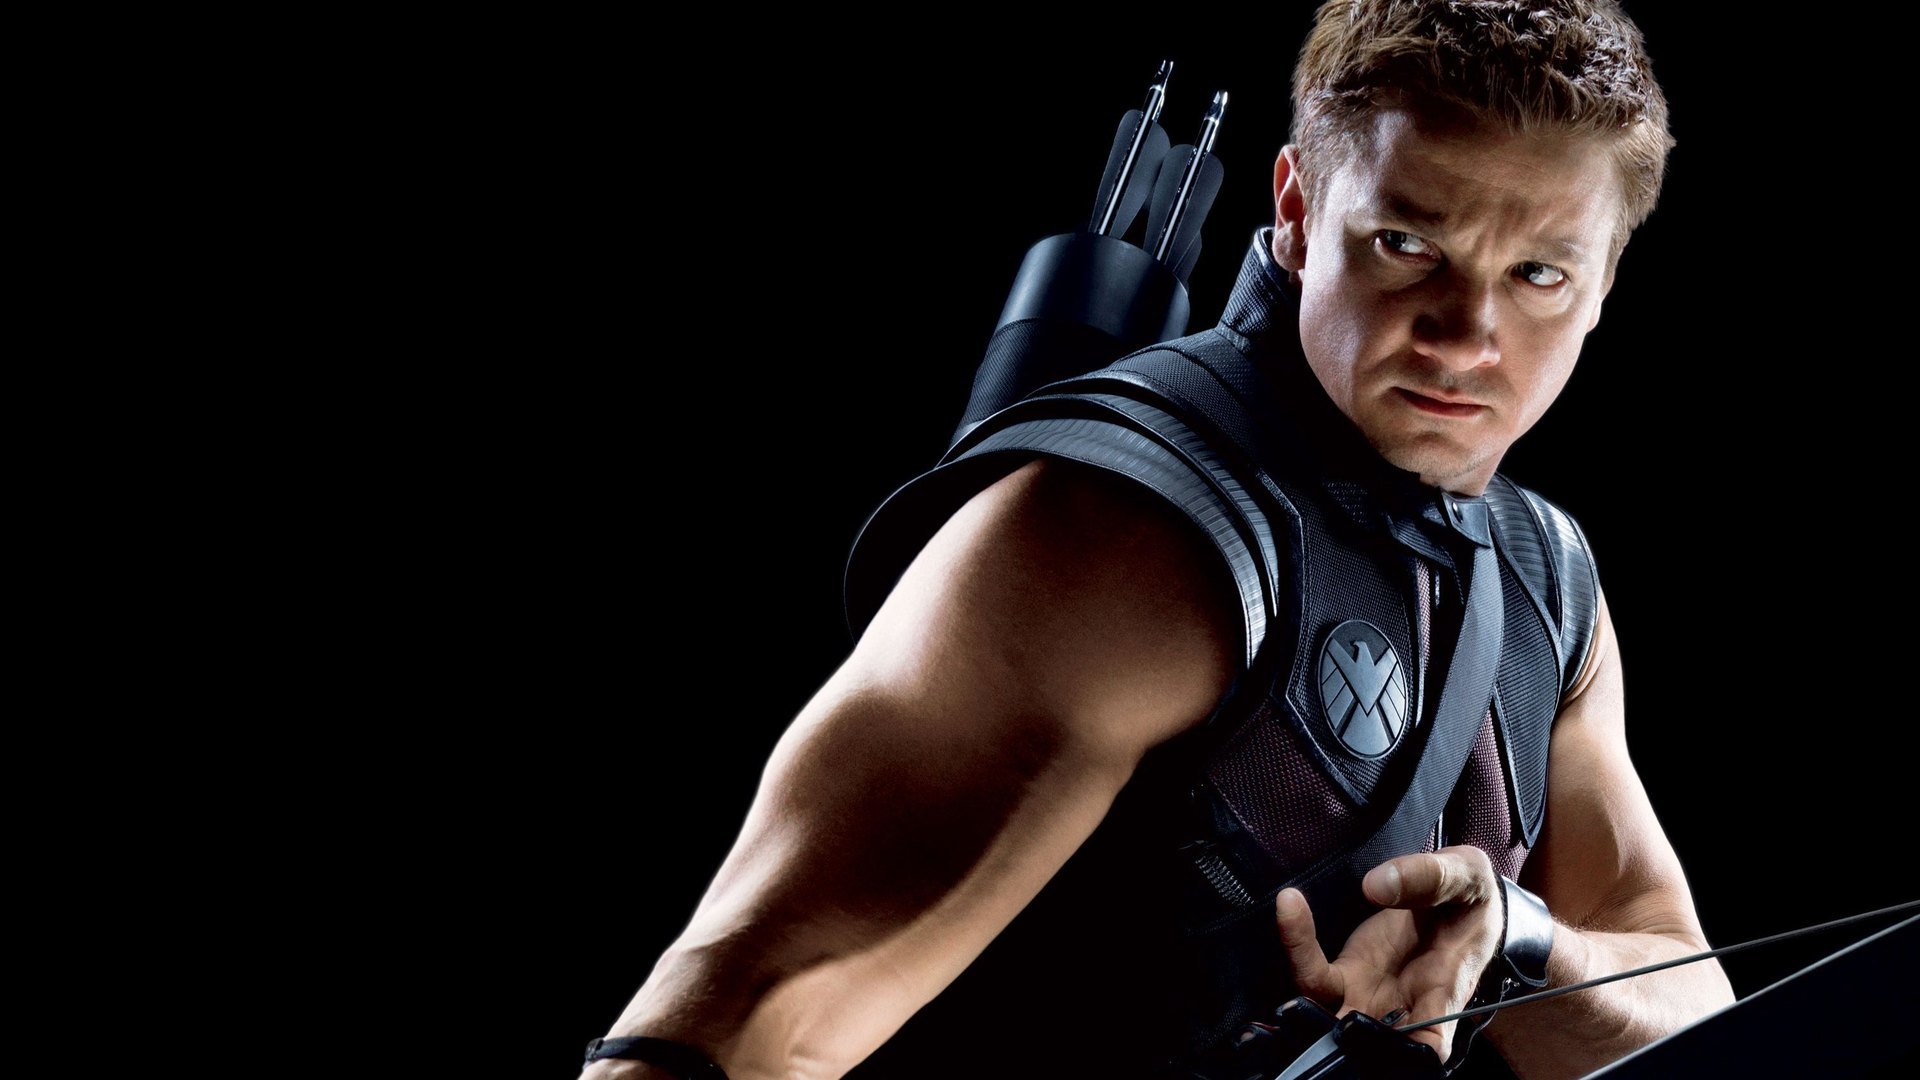 Hawkeye Wallpaper Image Photos Pictures Background